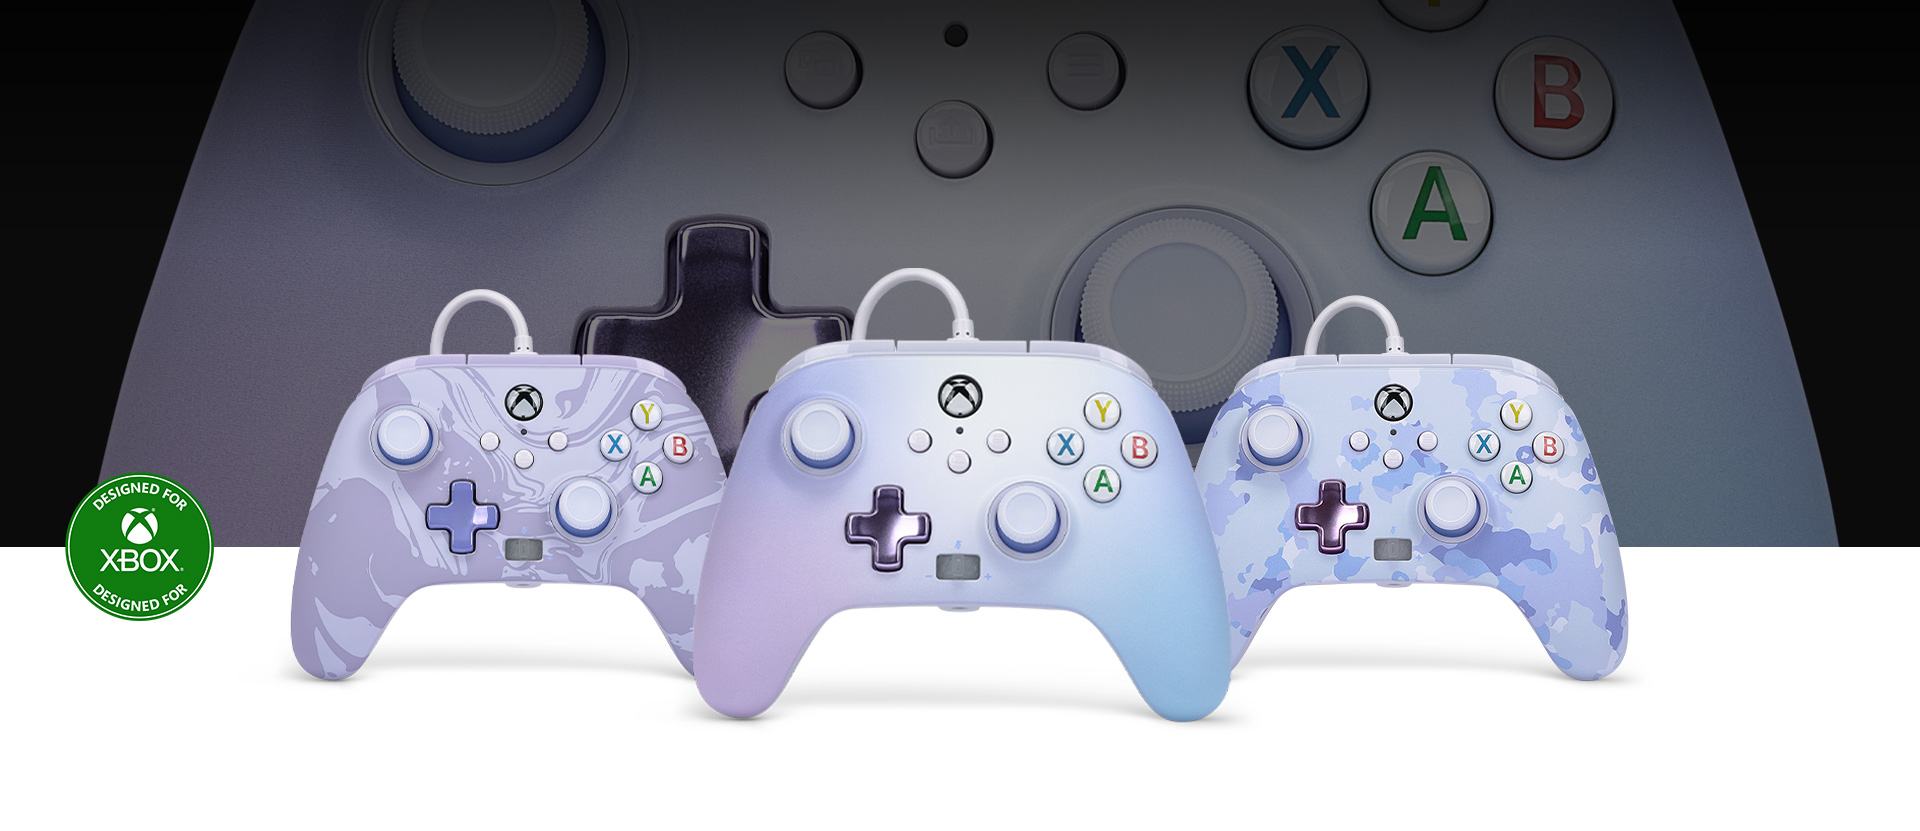 Designed for Xbox logo, Pastel Dream controller in front with the Purple Swirl and Purple Camo controllers beside it